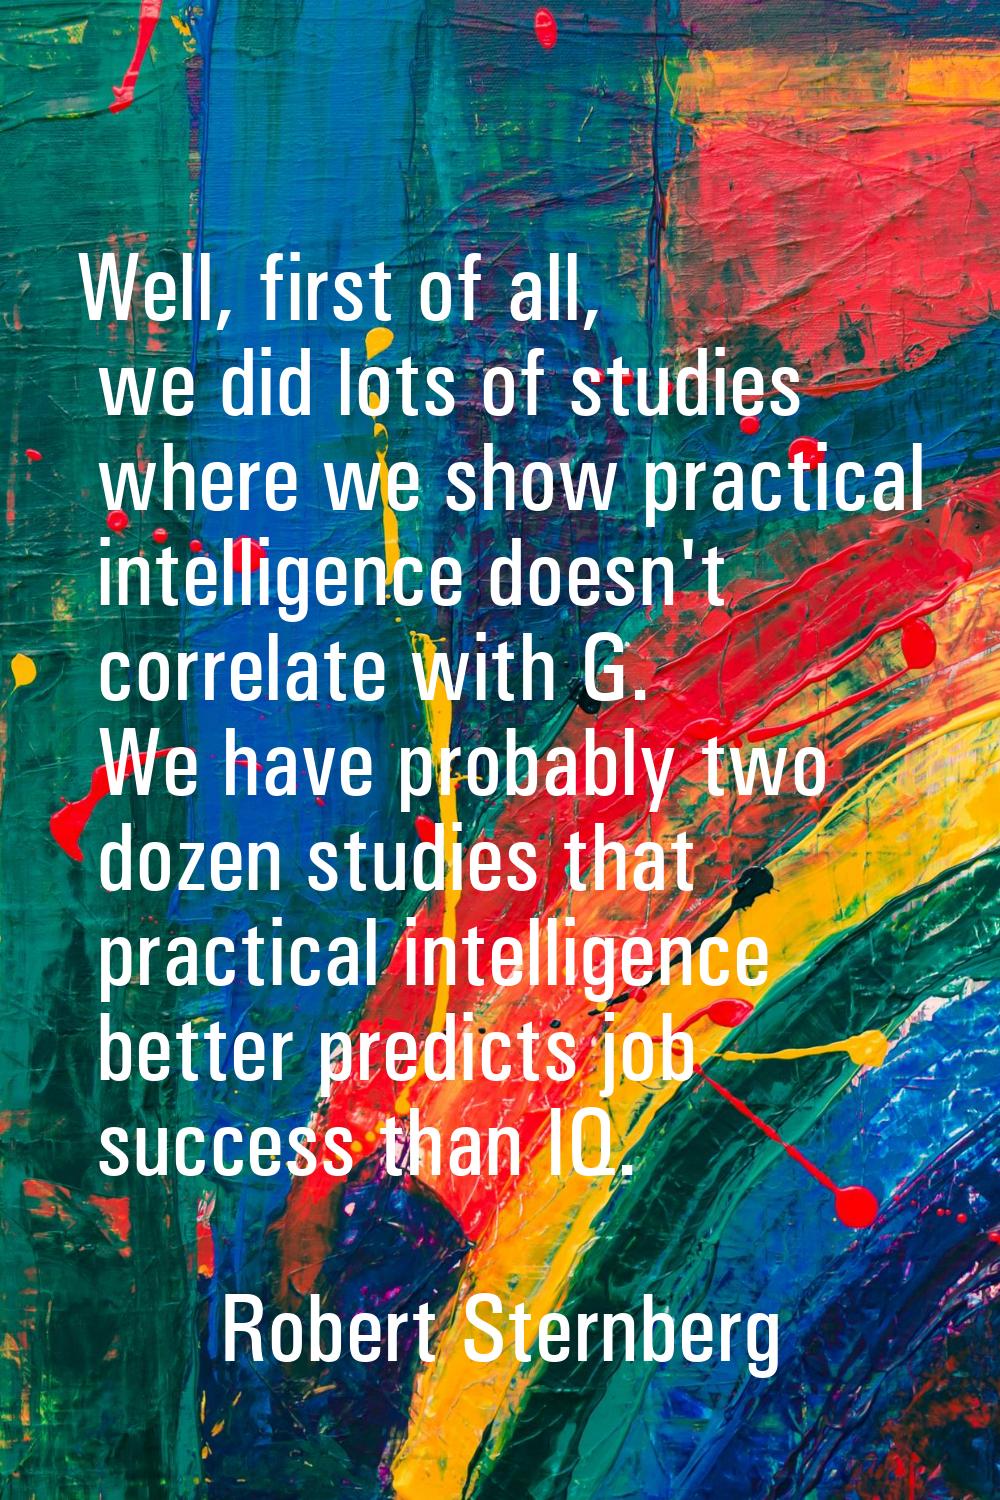 Well, first of all, we did lots of studies where we show practical intelligence doesn't correlate w